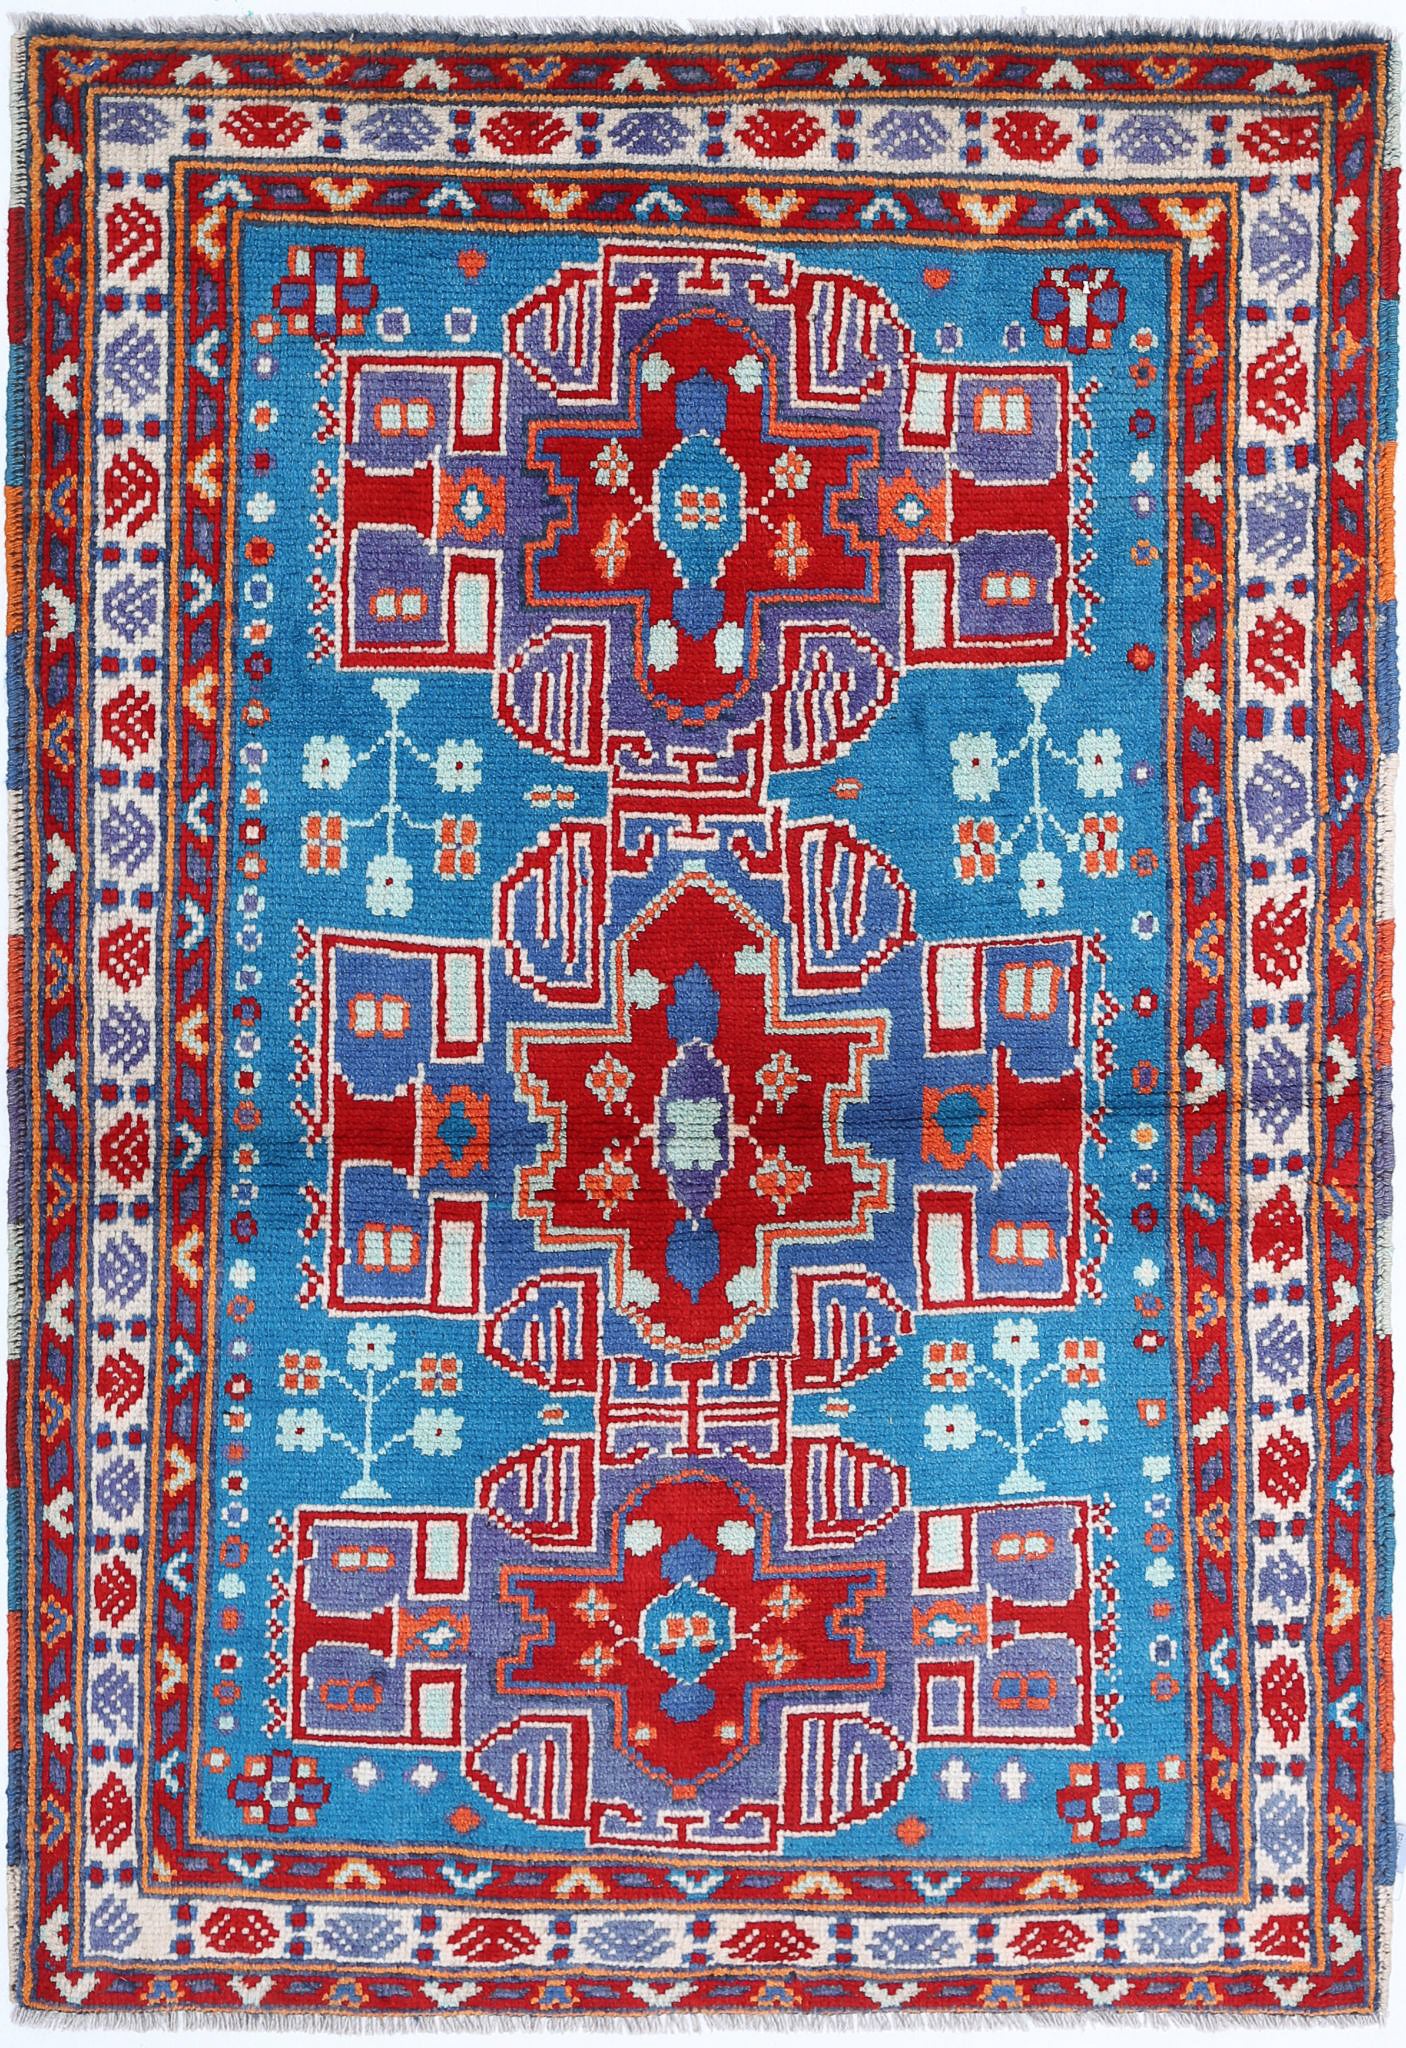 Revival-hand-knotted-qarghani-wool-rug-5014065.jpg